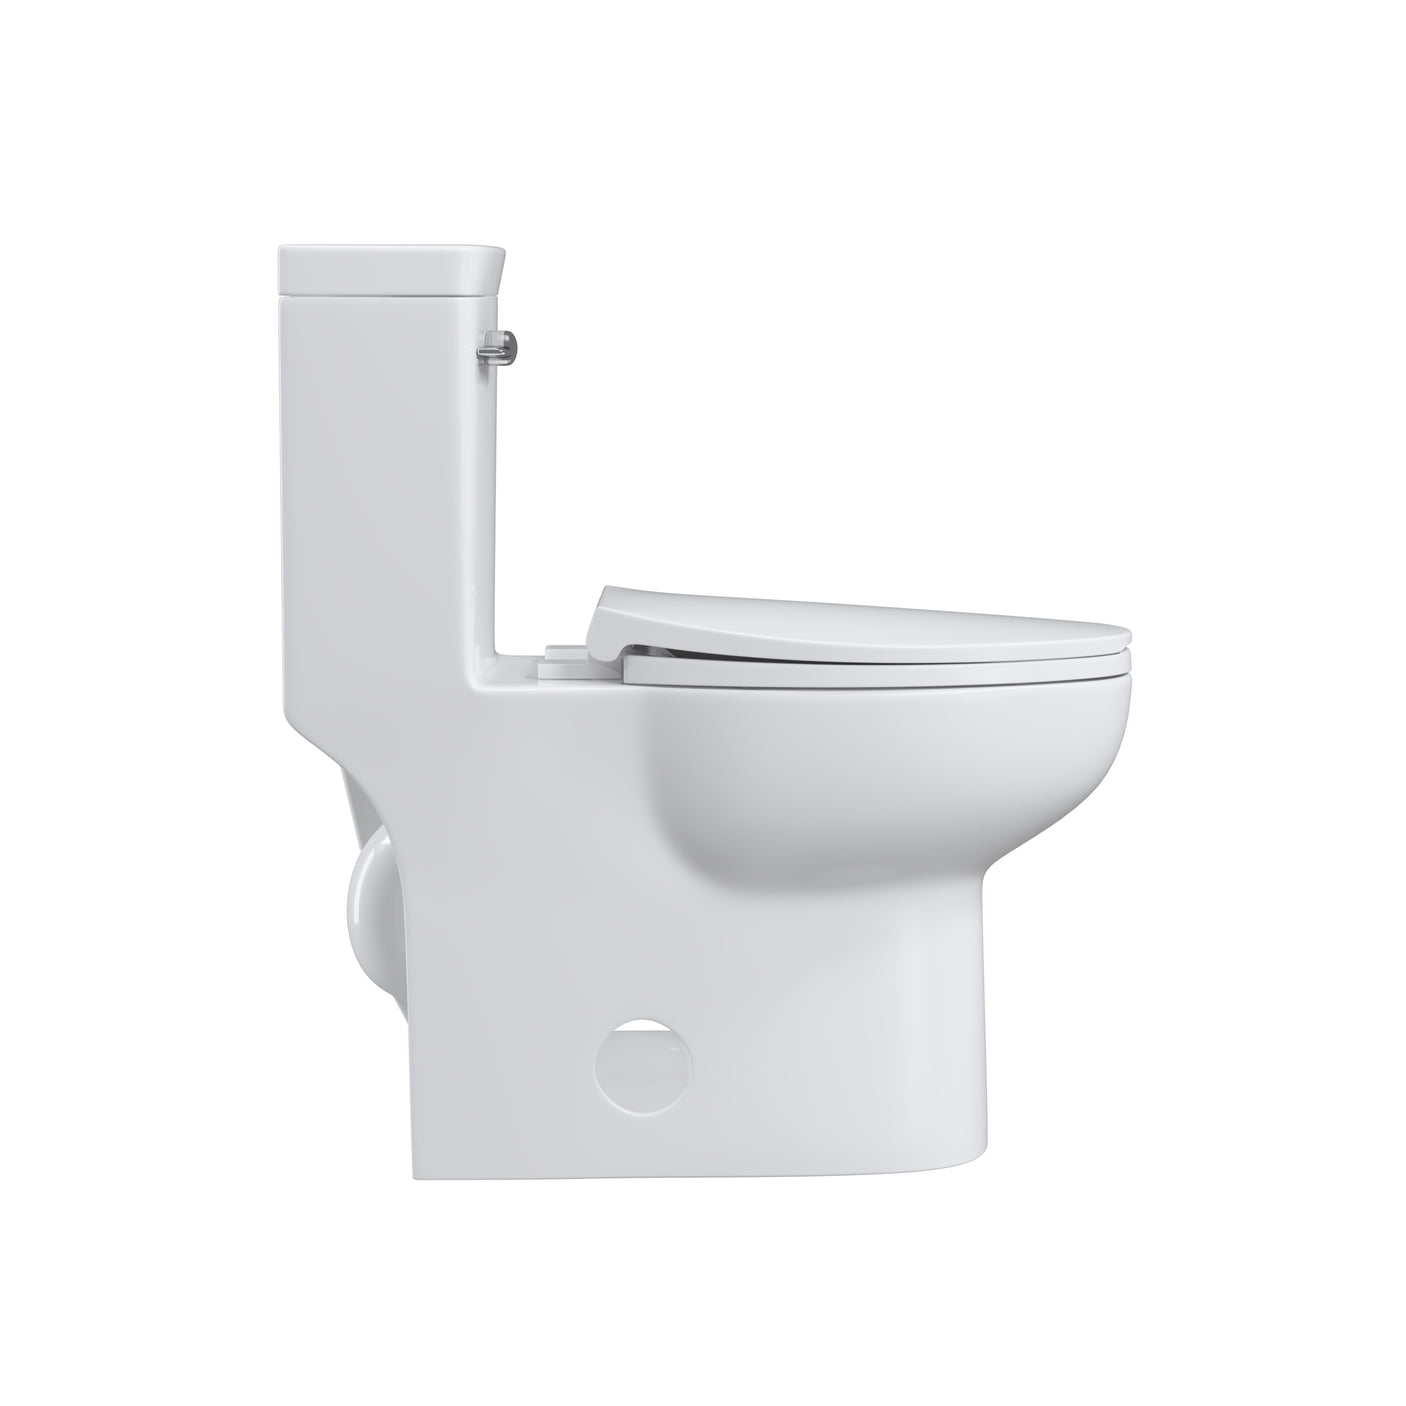 Single Flush Elongated Standard One Piece Toilet with Comfortable Seat Height, Soft Close Seat Cover, High-Efficiency Supply, and White Finish Toilet Bowl (White Toilet)